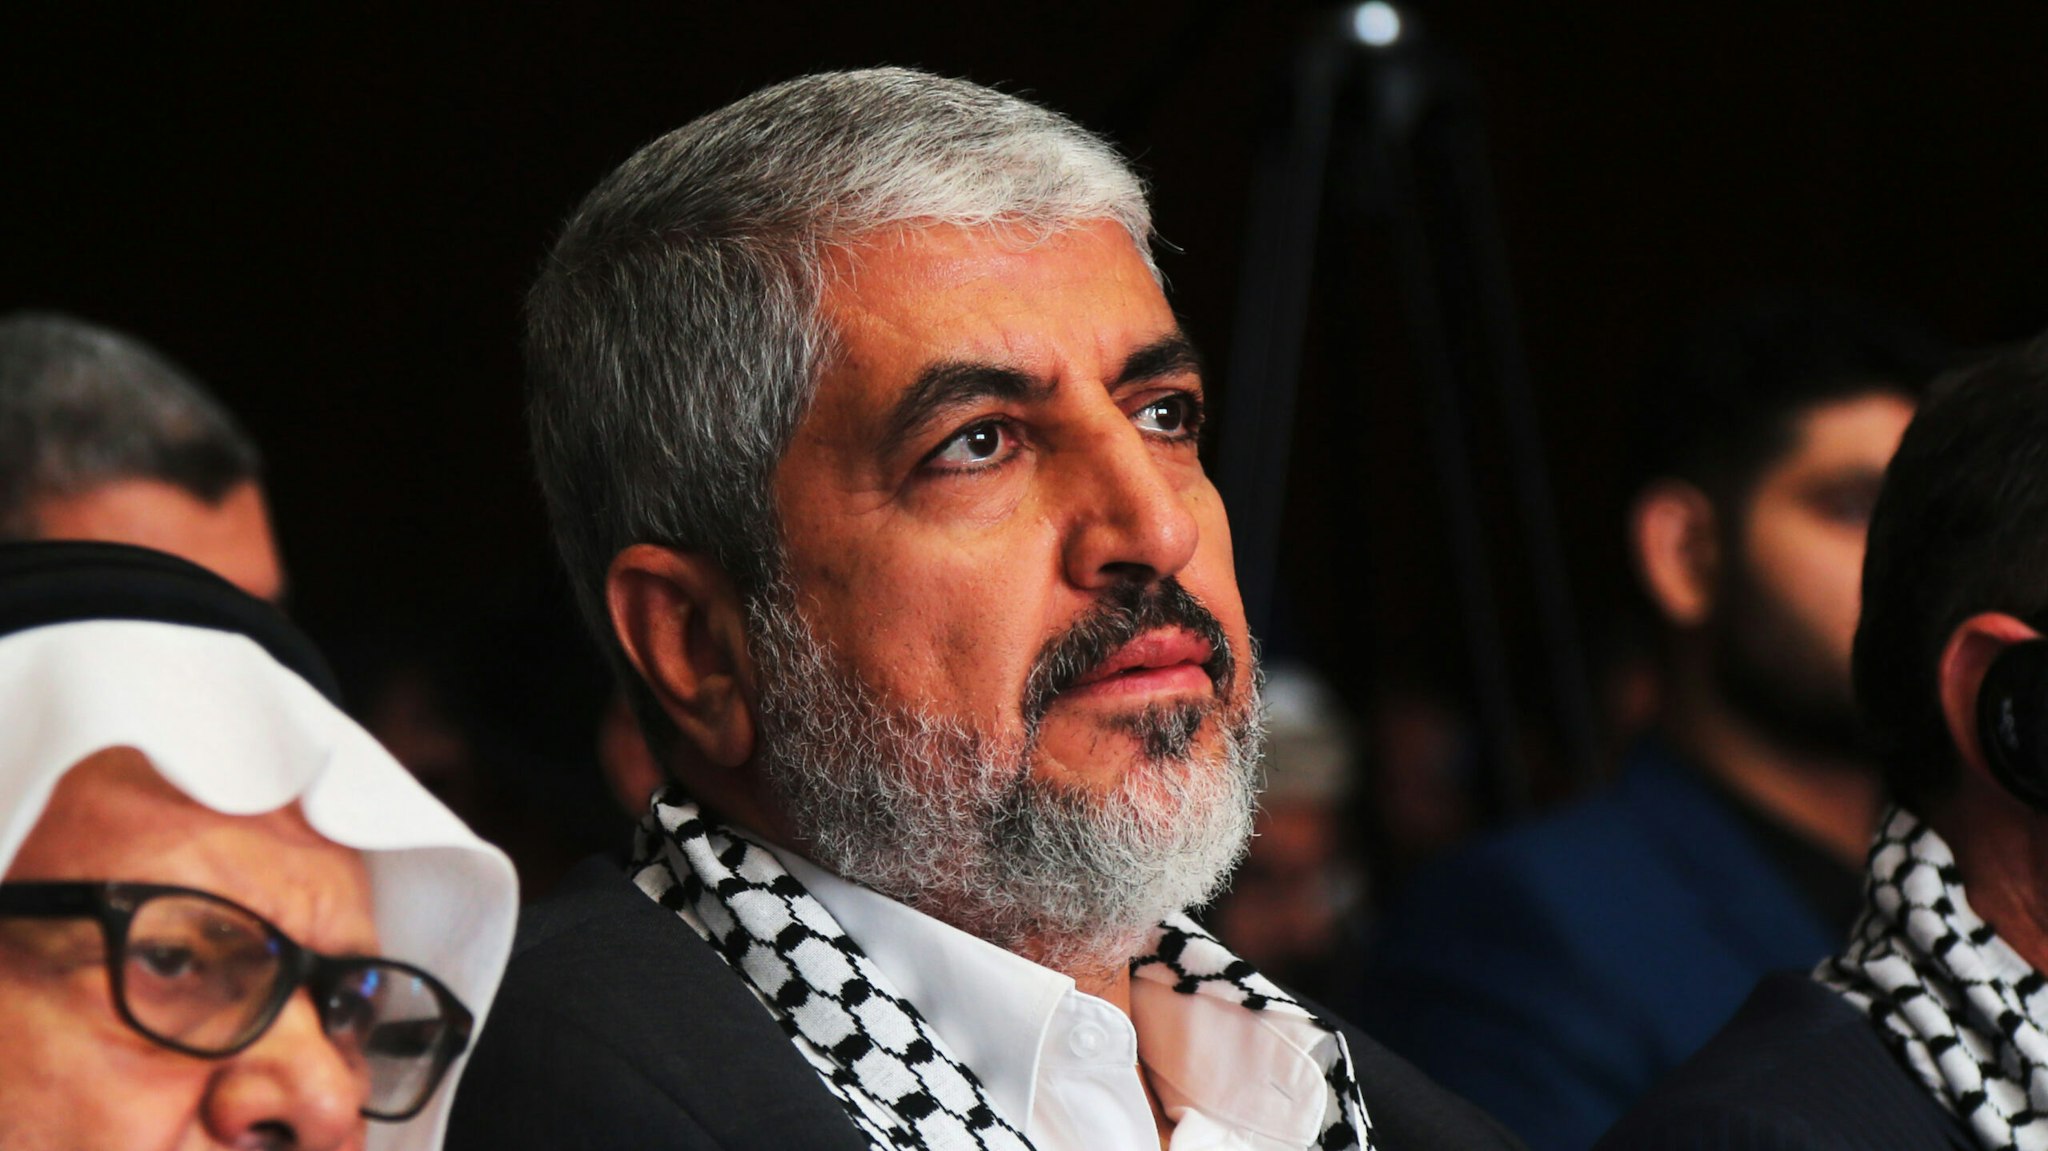 Former political bureau chief of Hamas, Khaled Mashal speaks as he attends the Baitul Maqdis Opinion Leaders Forum on October 12, 2018 in Istanbul